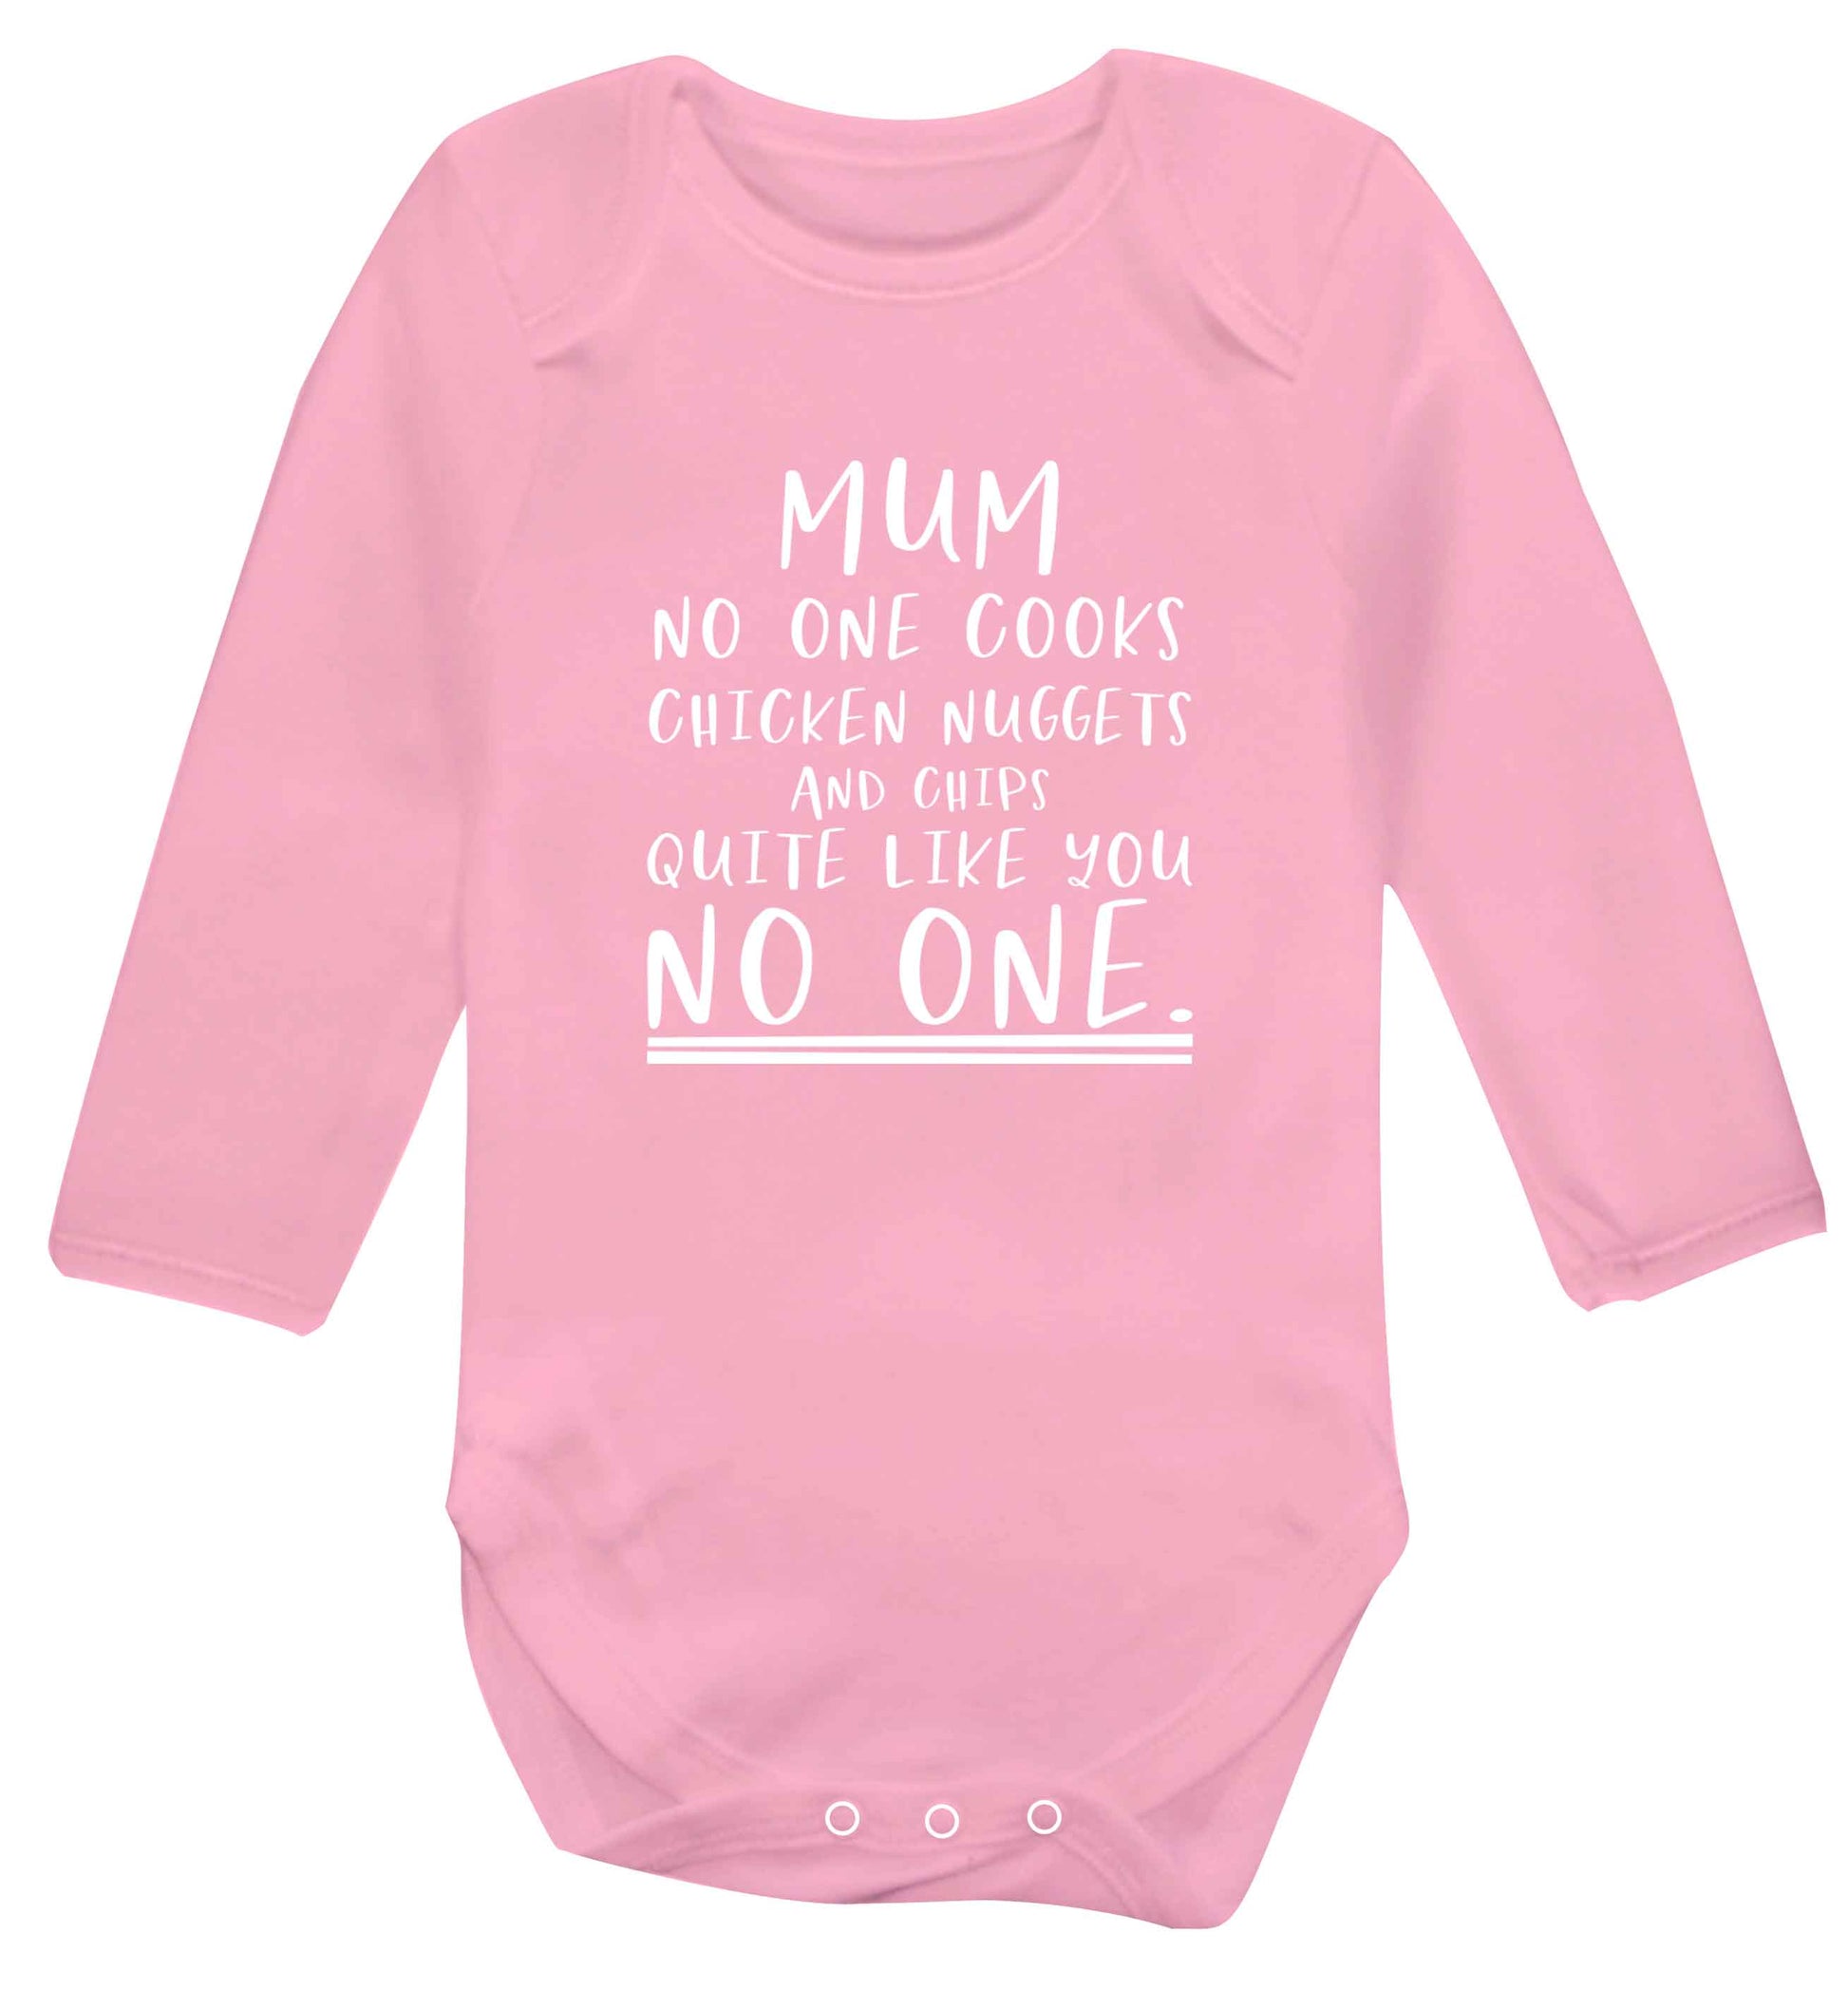 Super funny sassy gift for mother's day or birthday!  Mum no one cooks chicken nuggets and chips like you no one baby vest long sleeved pale pink 6-12 months